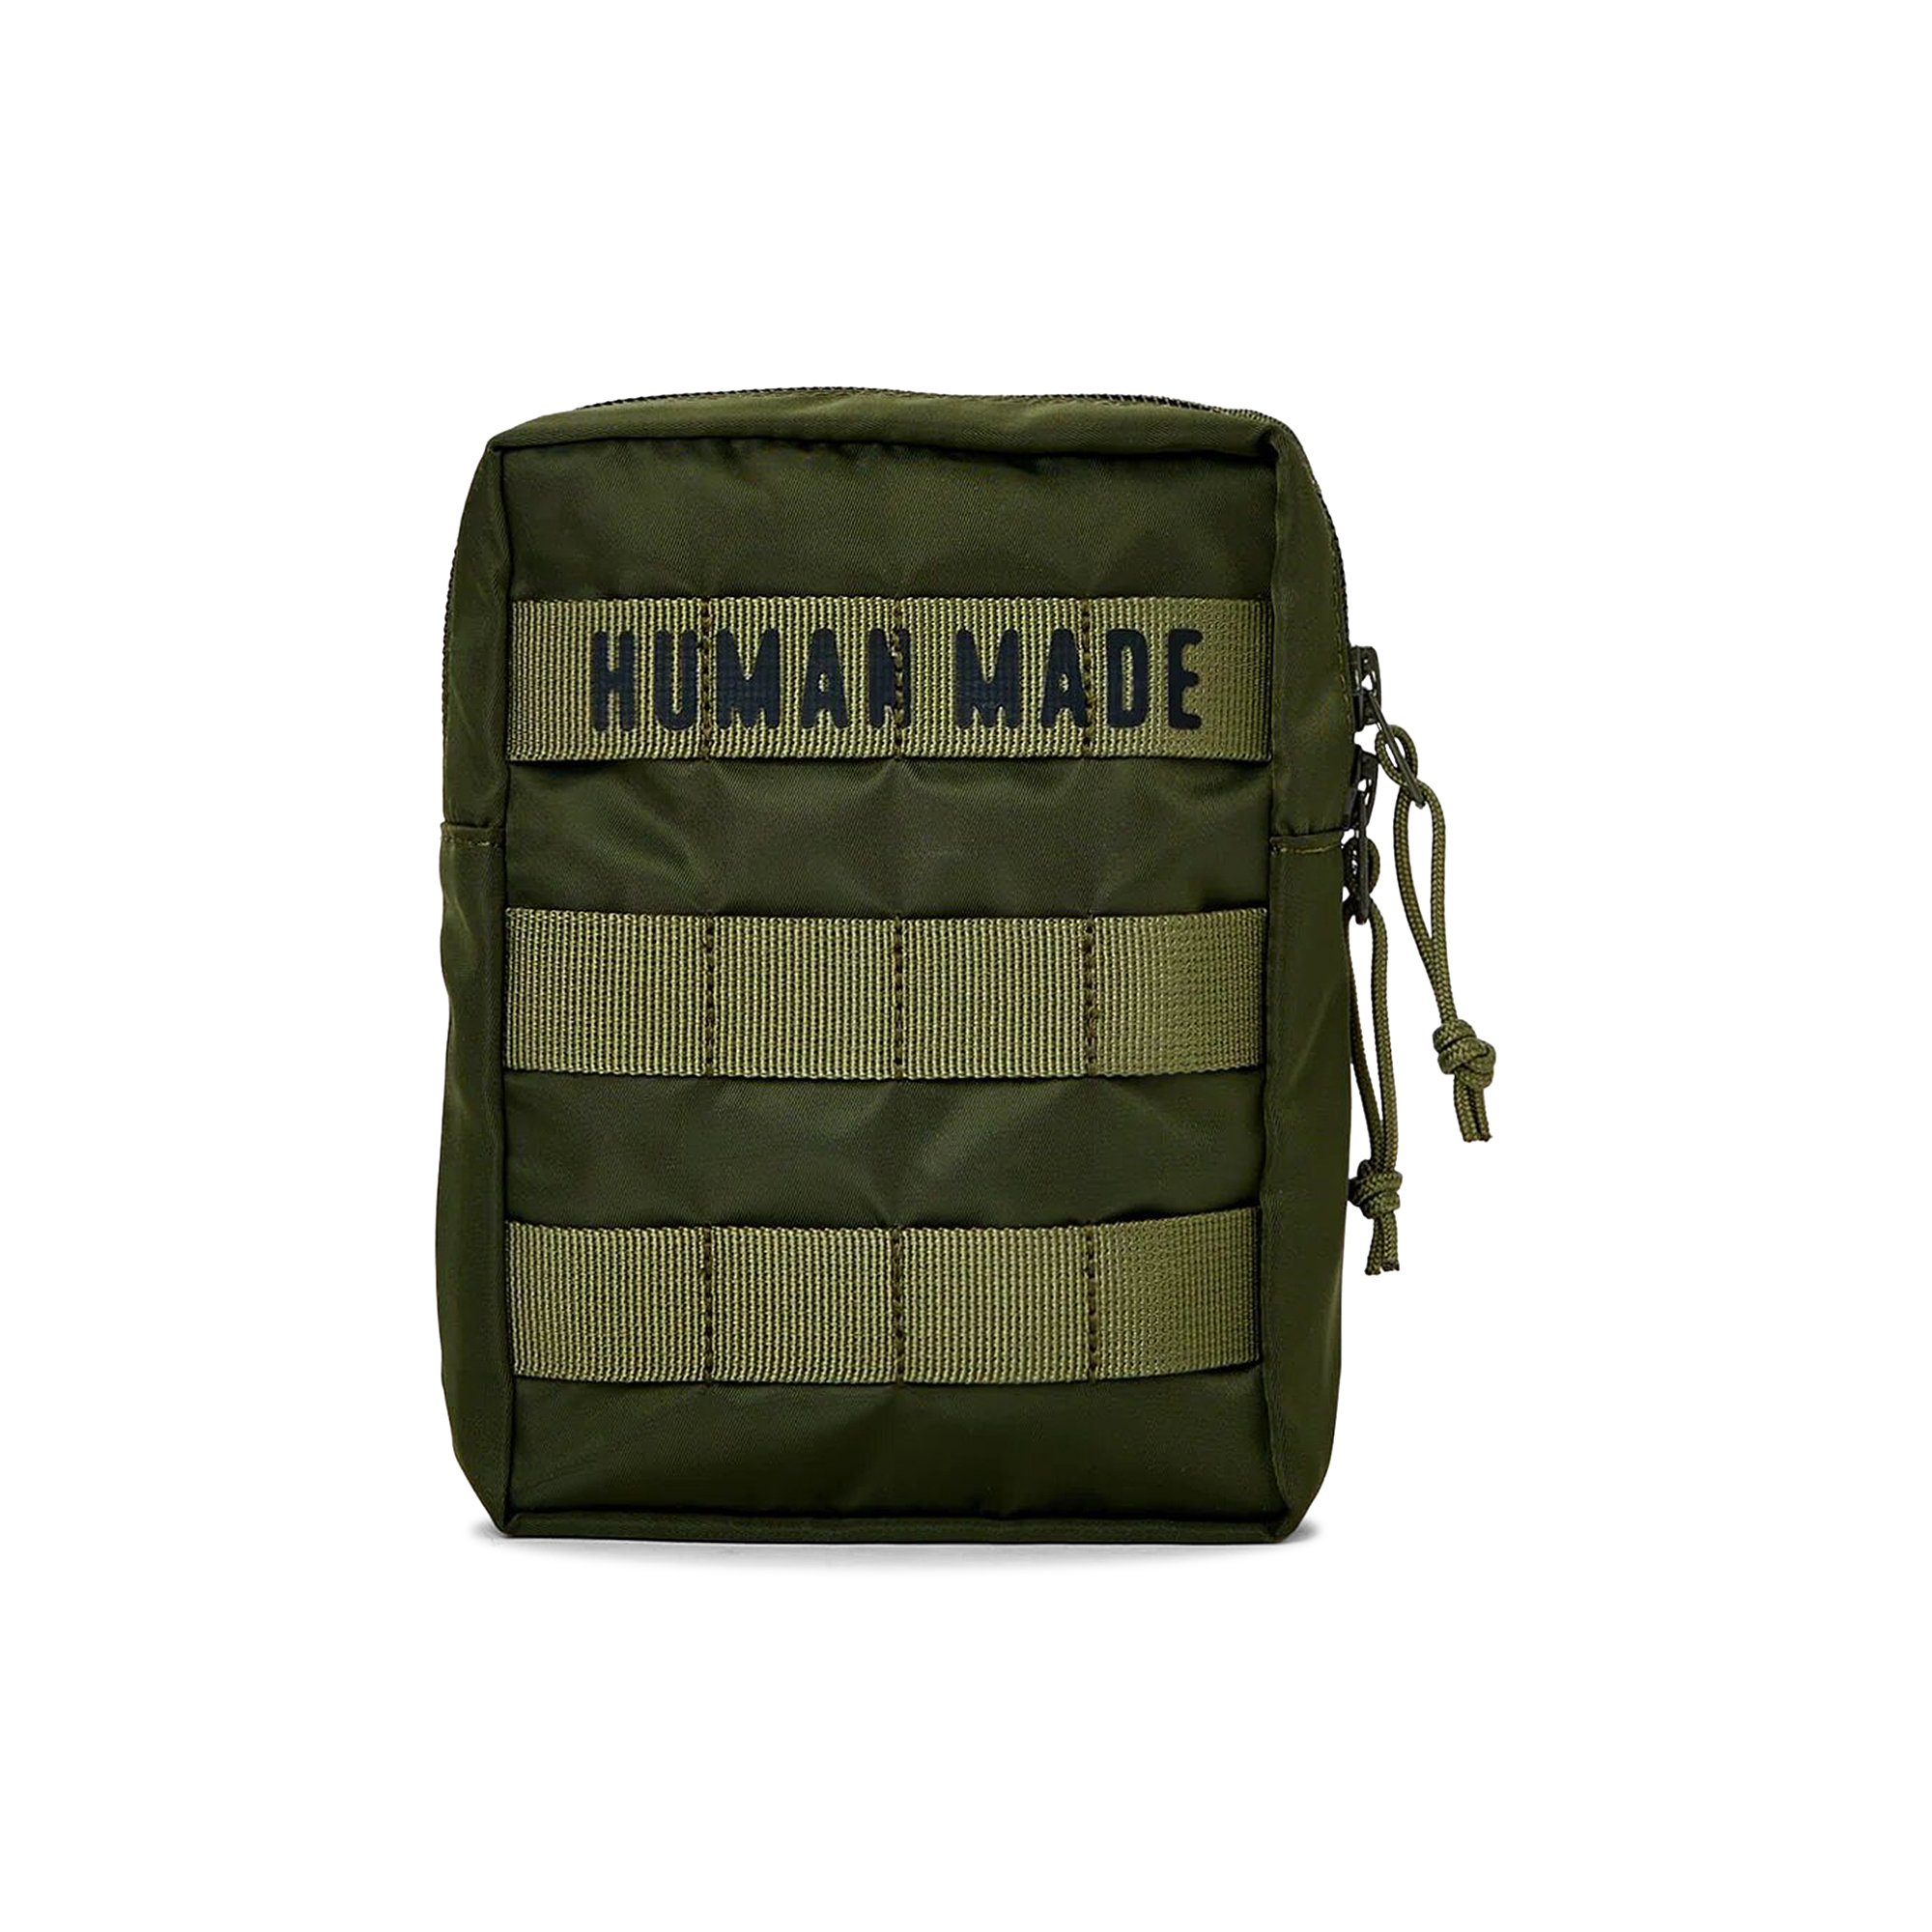 Buy Human Made Military Pouch #2 'Olive Drab' - HM25GD025 OLIV 